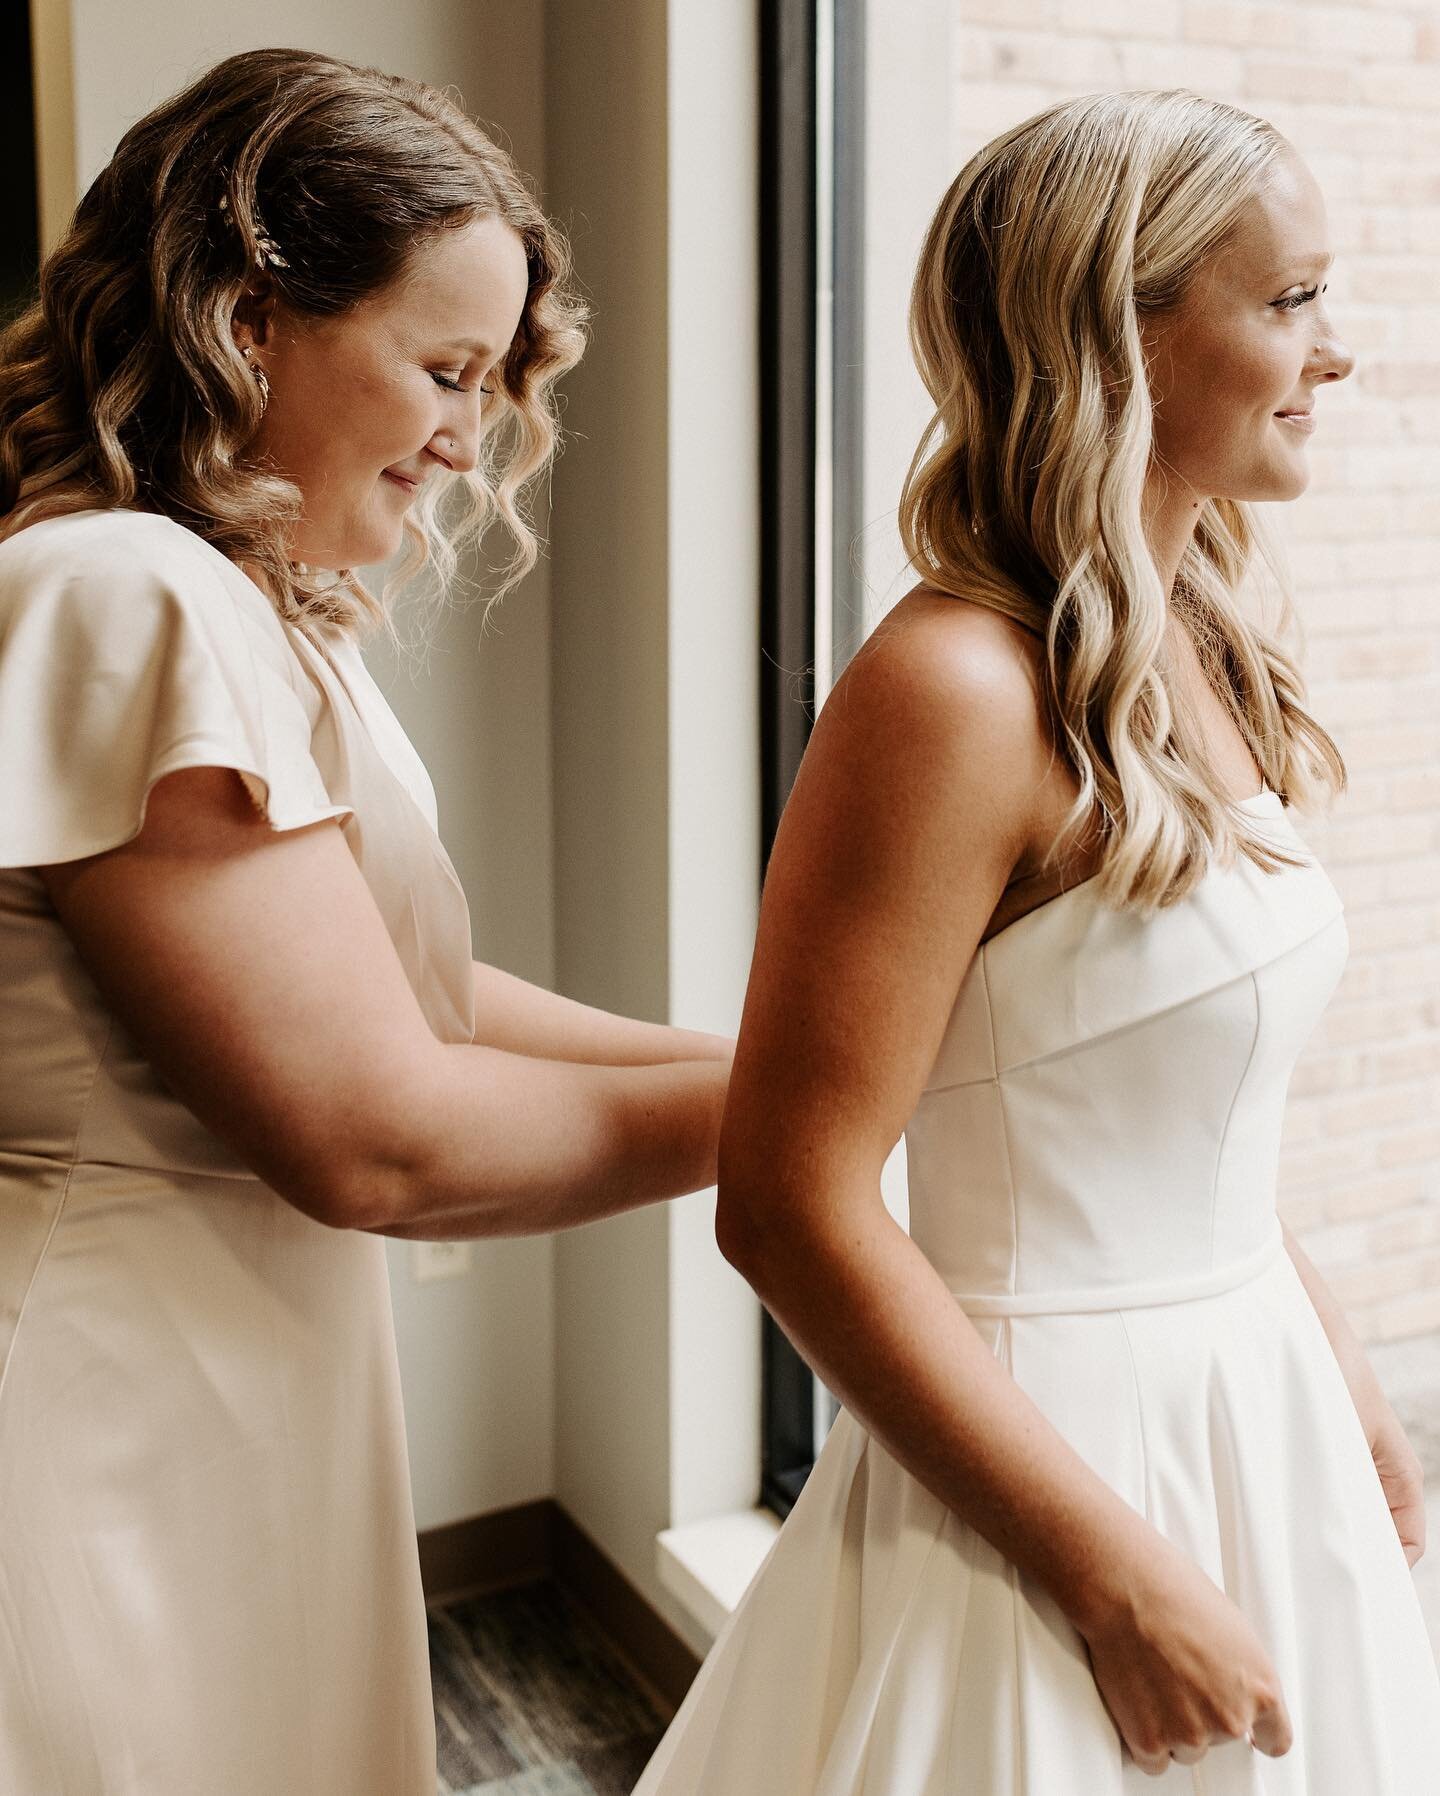 I had the honor of styling Holley&rsquo;s hair for her wedding last weekend. Didn&rsquo;t she make the most beautiful bride?!

It was the hardest decision choosing which photos to post from their sneak peak gallery. Holley&rsquo;s vision was perfecti